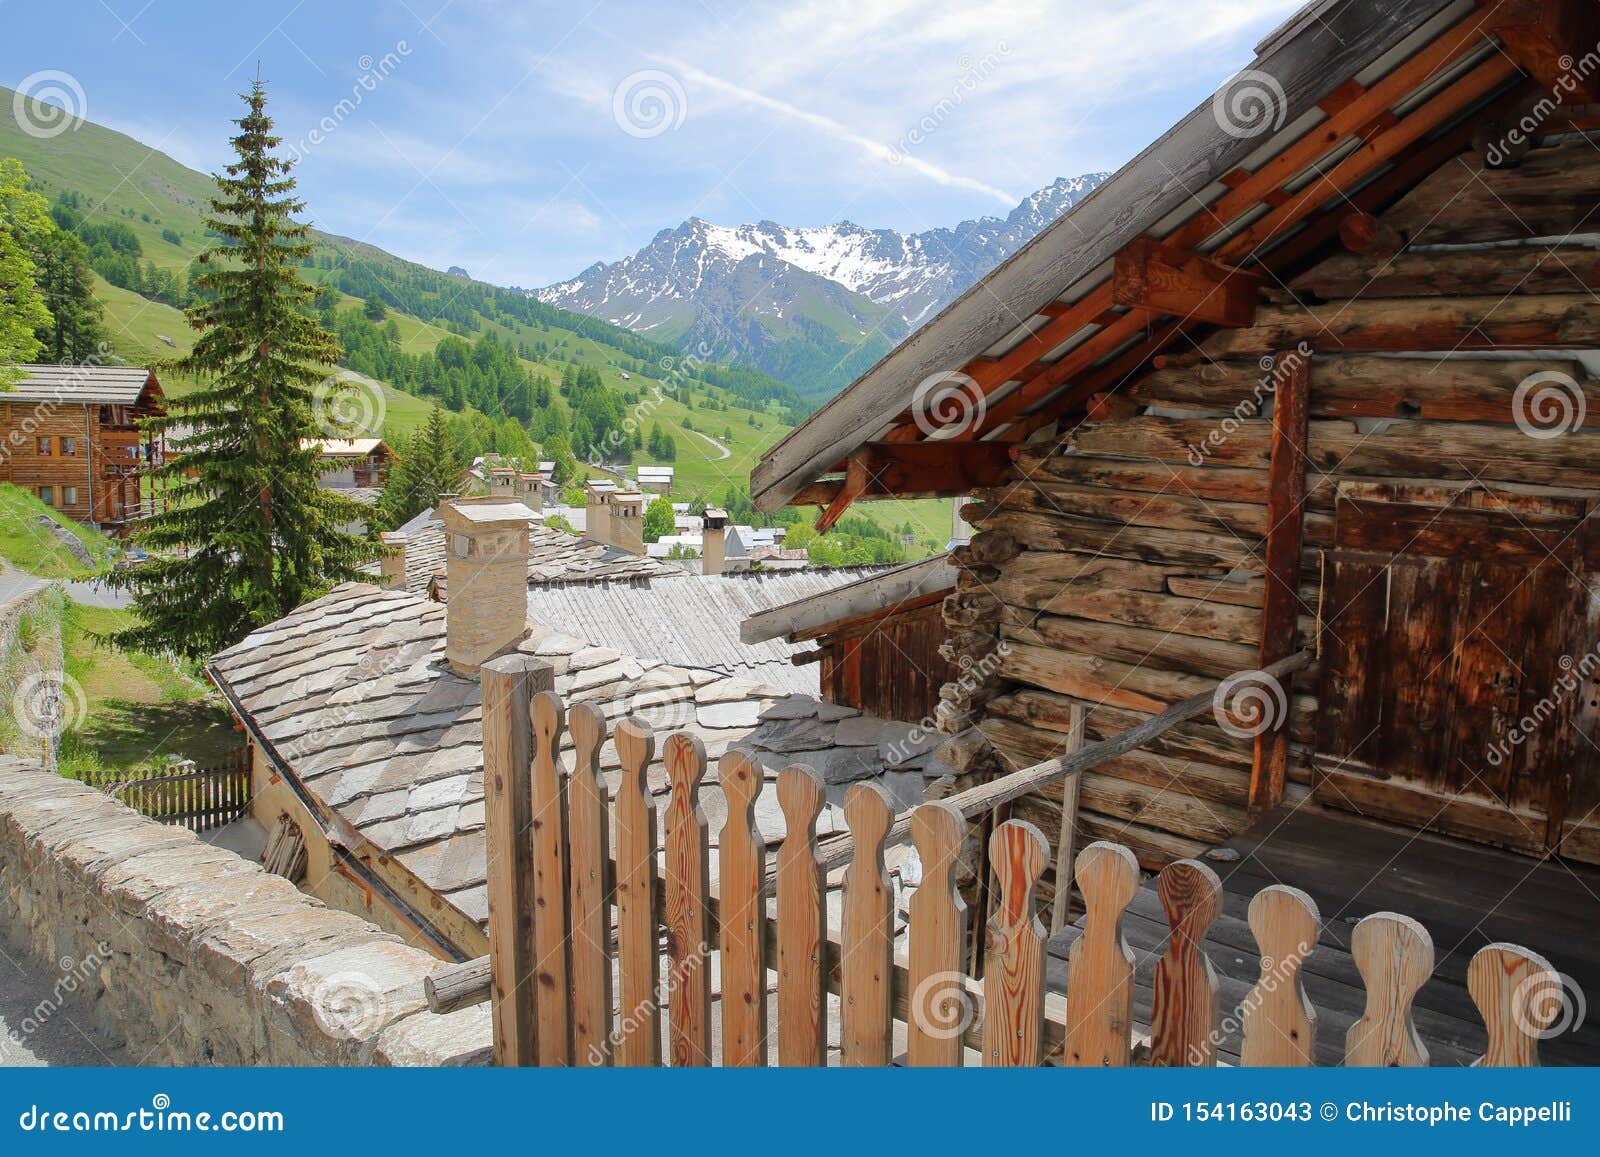 traditional roofs and a wooden house in saint veran village, with mountain range covered with snow and pine tree forests